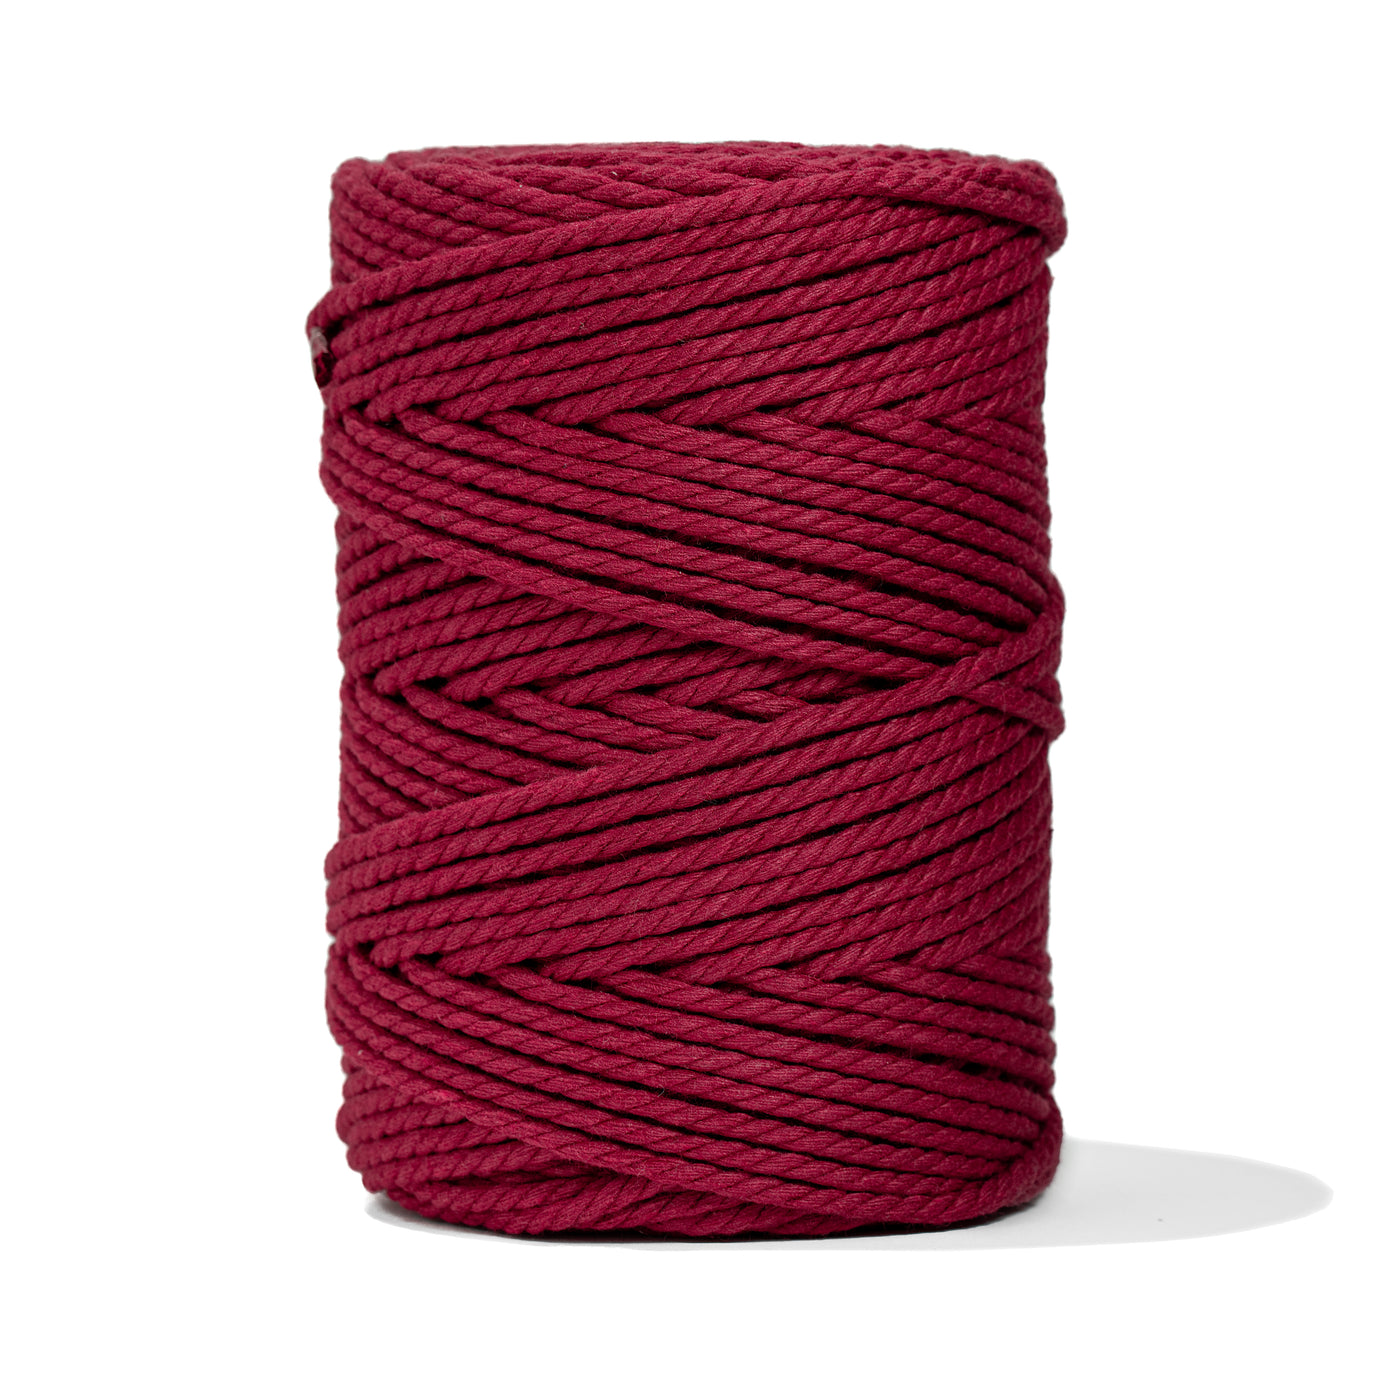 COTTON ROPE ZERO WASTE 3 MM - 3 PLY - RUBY RED COLOR